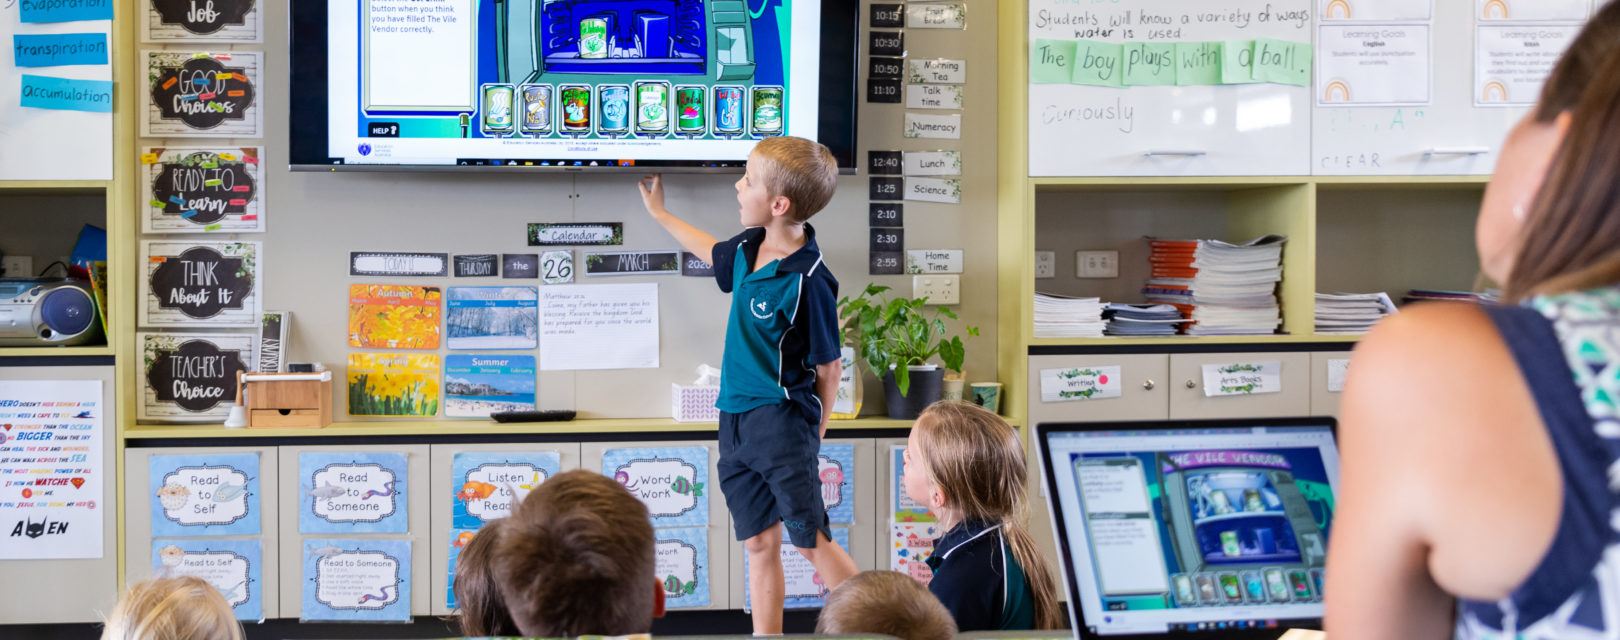 Primary school student standing at a wall-mounted display in the front of a class, pointing to what's on the screen.